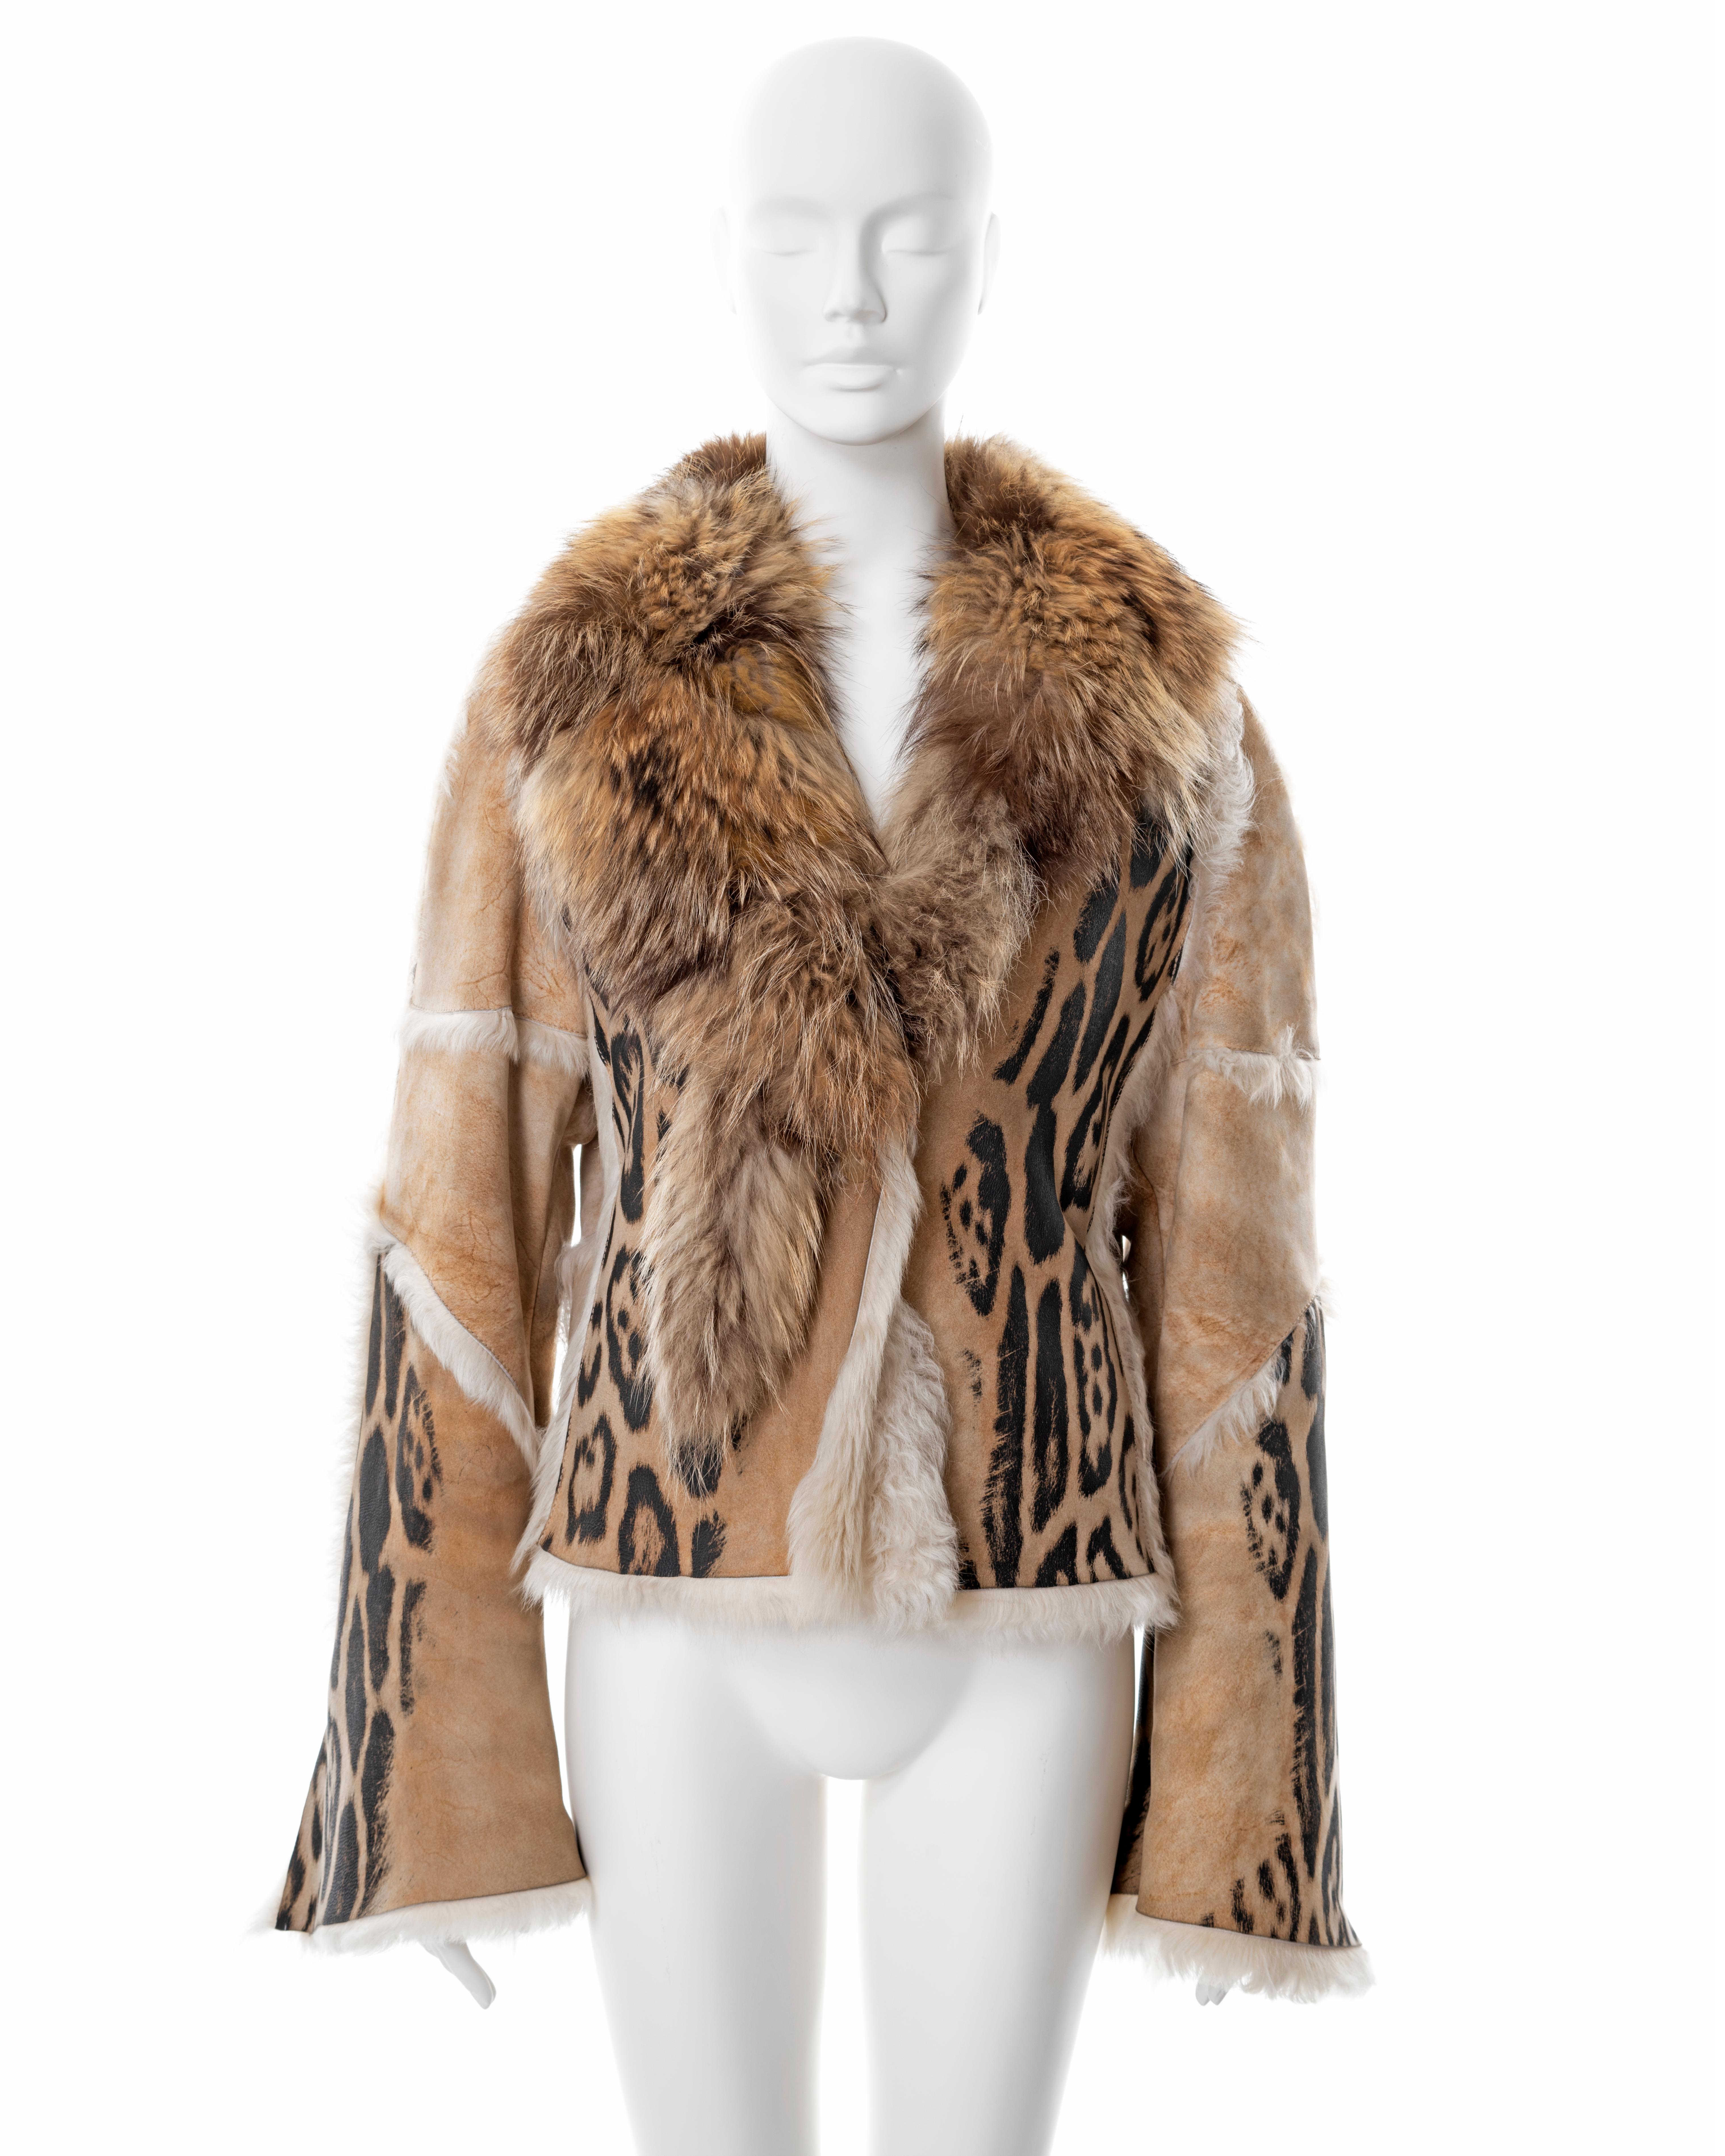 ▪ Roberto Cavalli sheepskin jacket
▪ Sold by One of a Kind Archive 
▪ Fall-Winter 2001
▪ Constructed from cream sheepskin with black leopard print 
▪ Fox fur collar 
▪ Long flared sleeves 
▪ Size Large
▪ Made in Italy 

All photographs in this